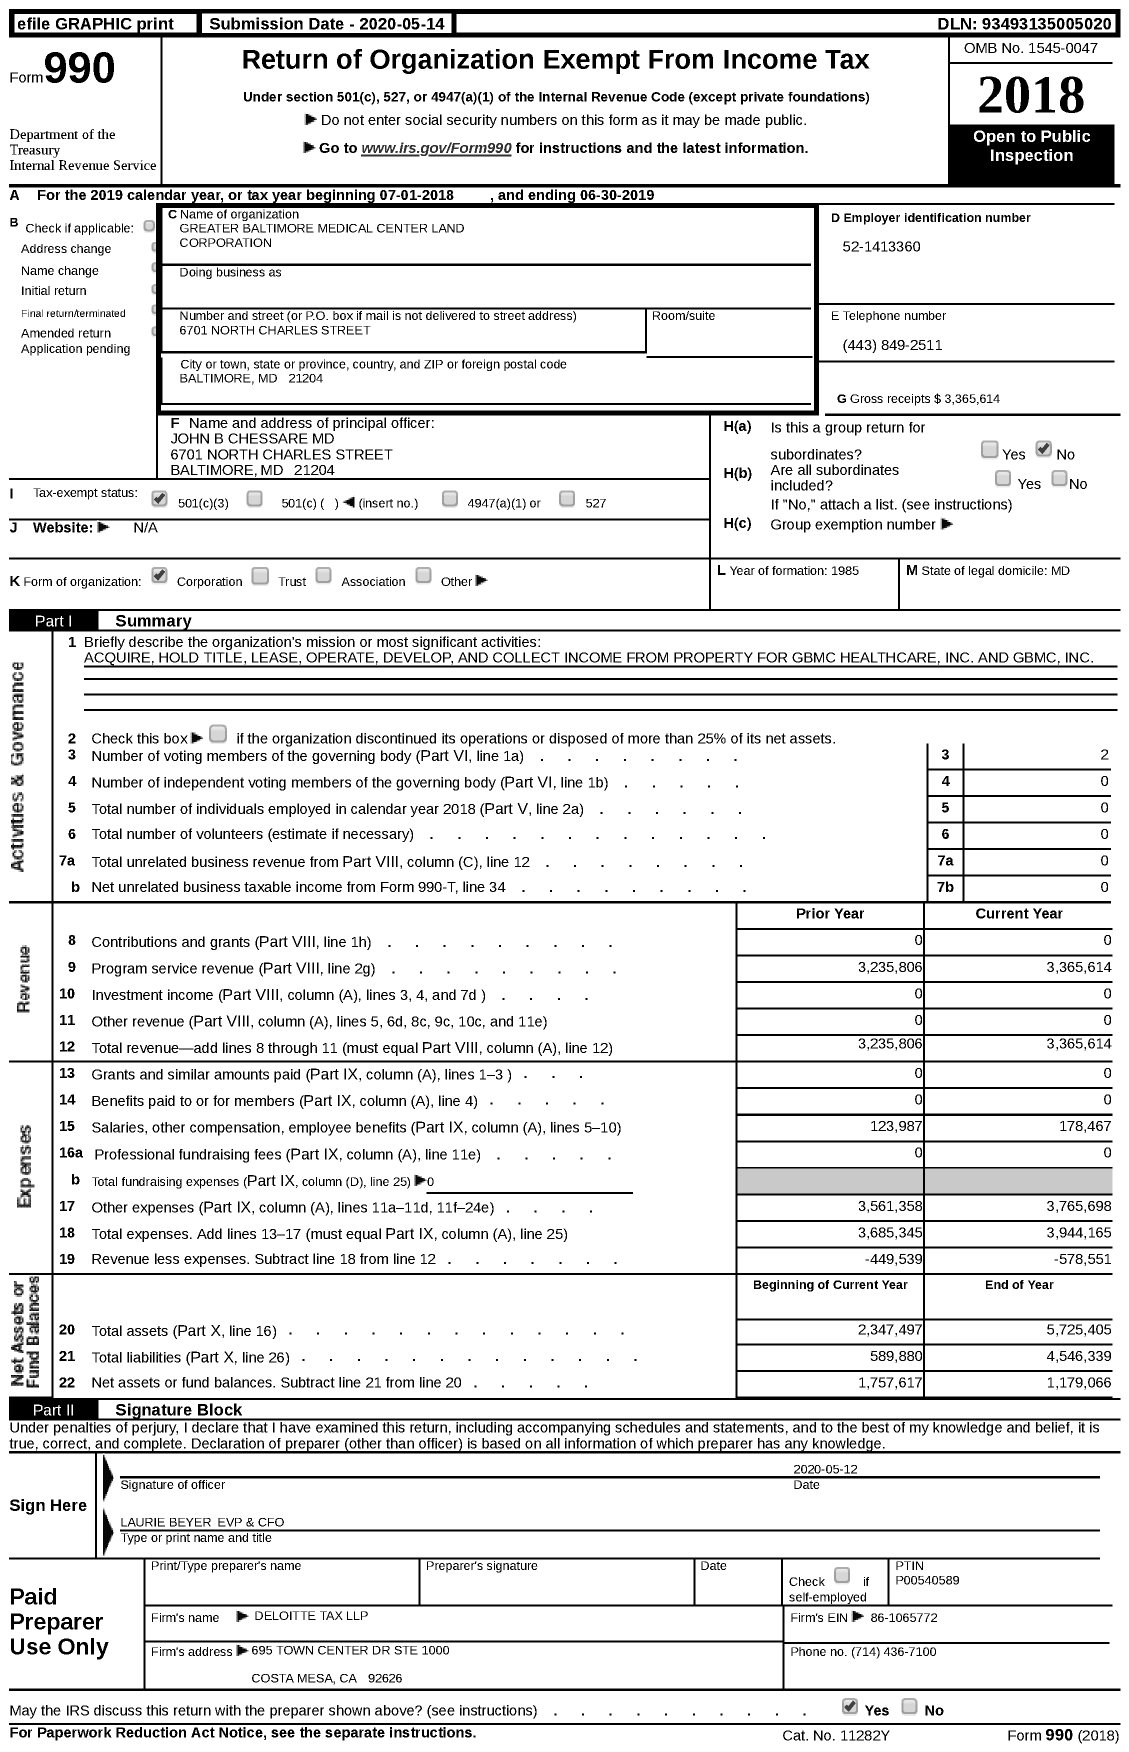 Image of first page of 2018 Form 990 for Greater Baltimore Medical Center Land Corporation